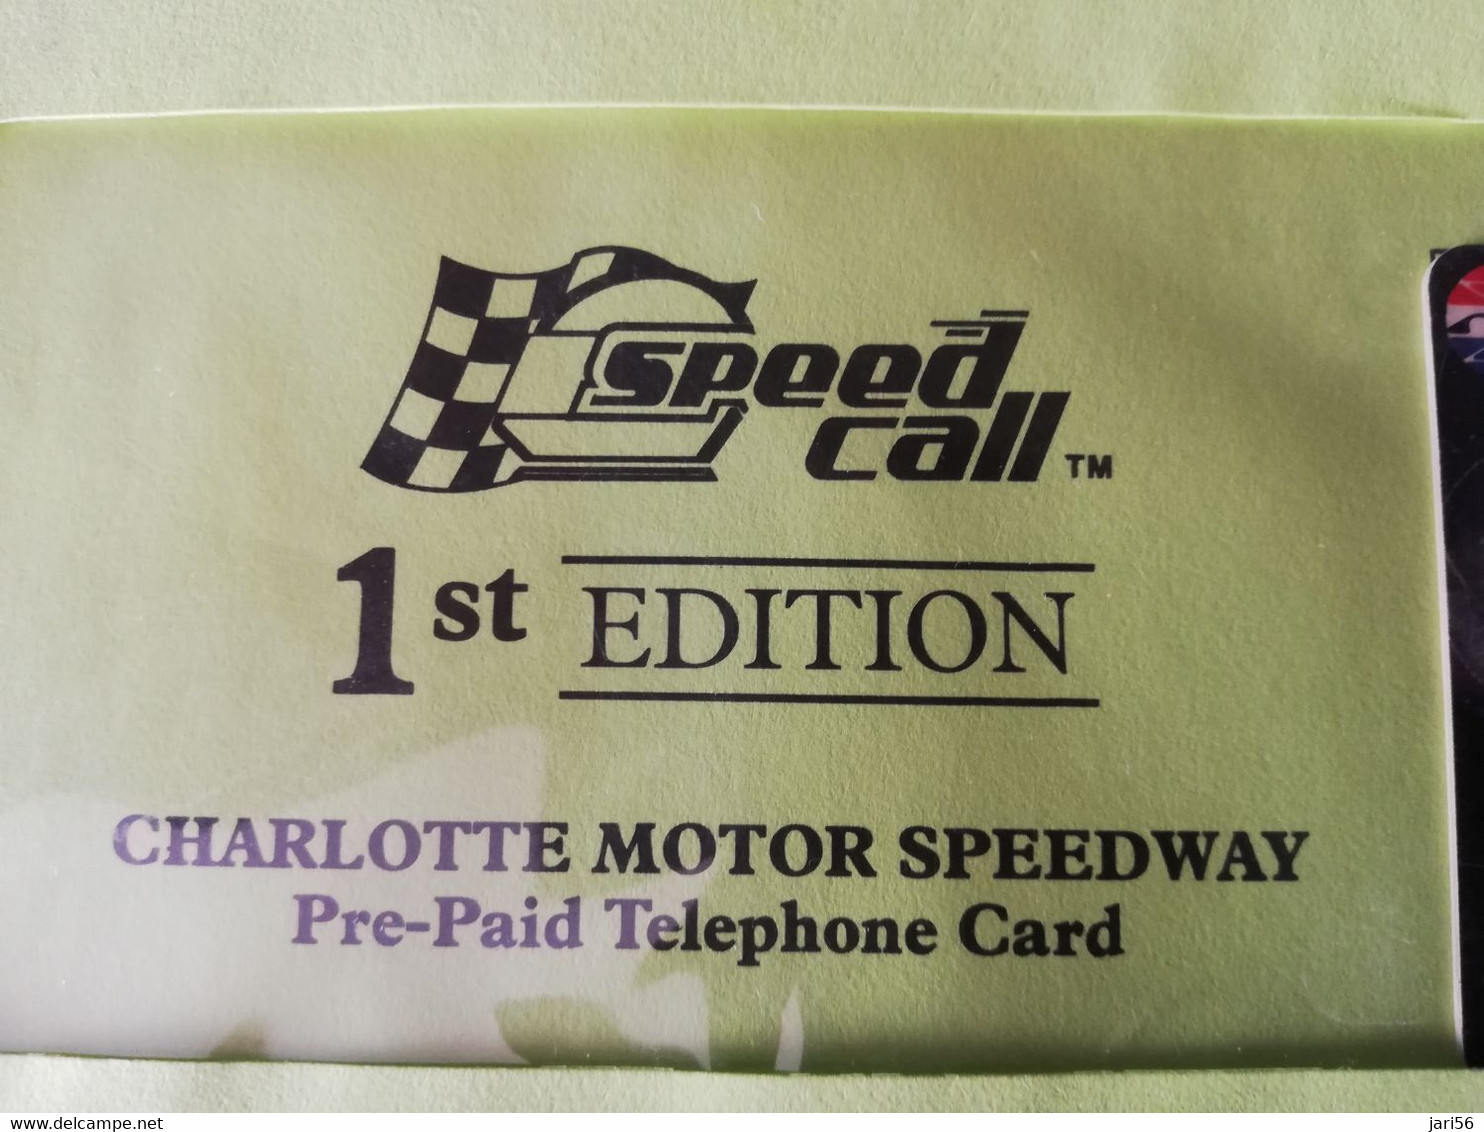 UNITED STATES /MELLOYELLO500/ SPEEDCALL/1ST EDITION  $5,-   MINT IN SEALED COVER    LIMITED EDITION ** 9399** - Colecciones